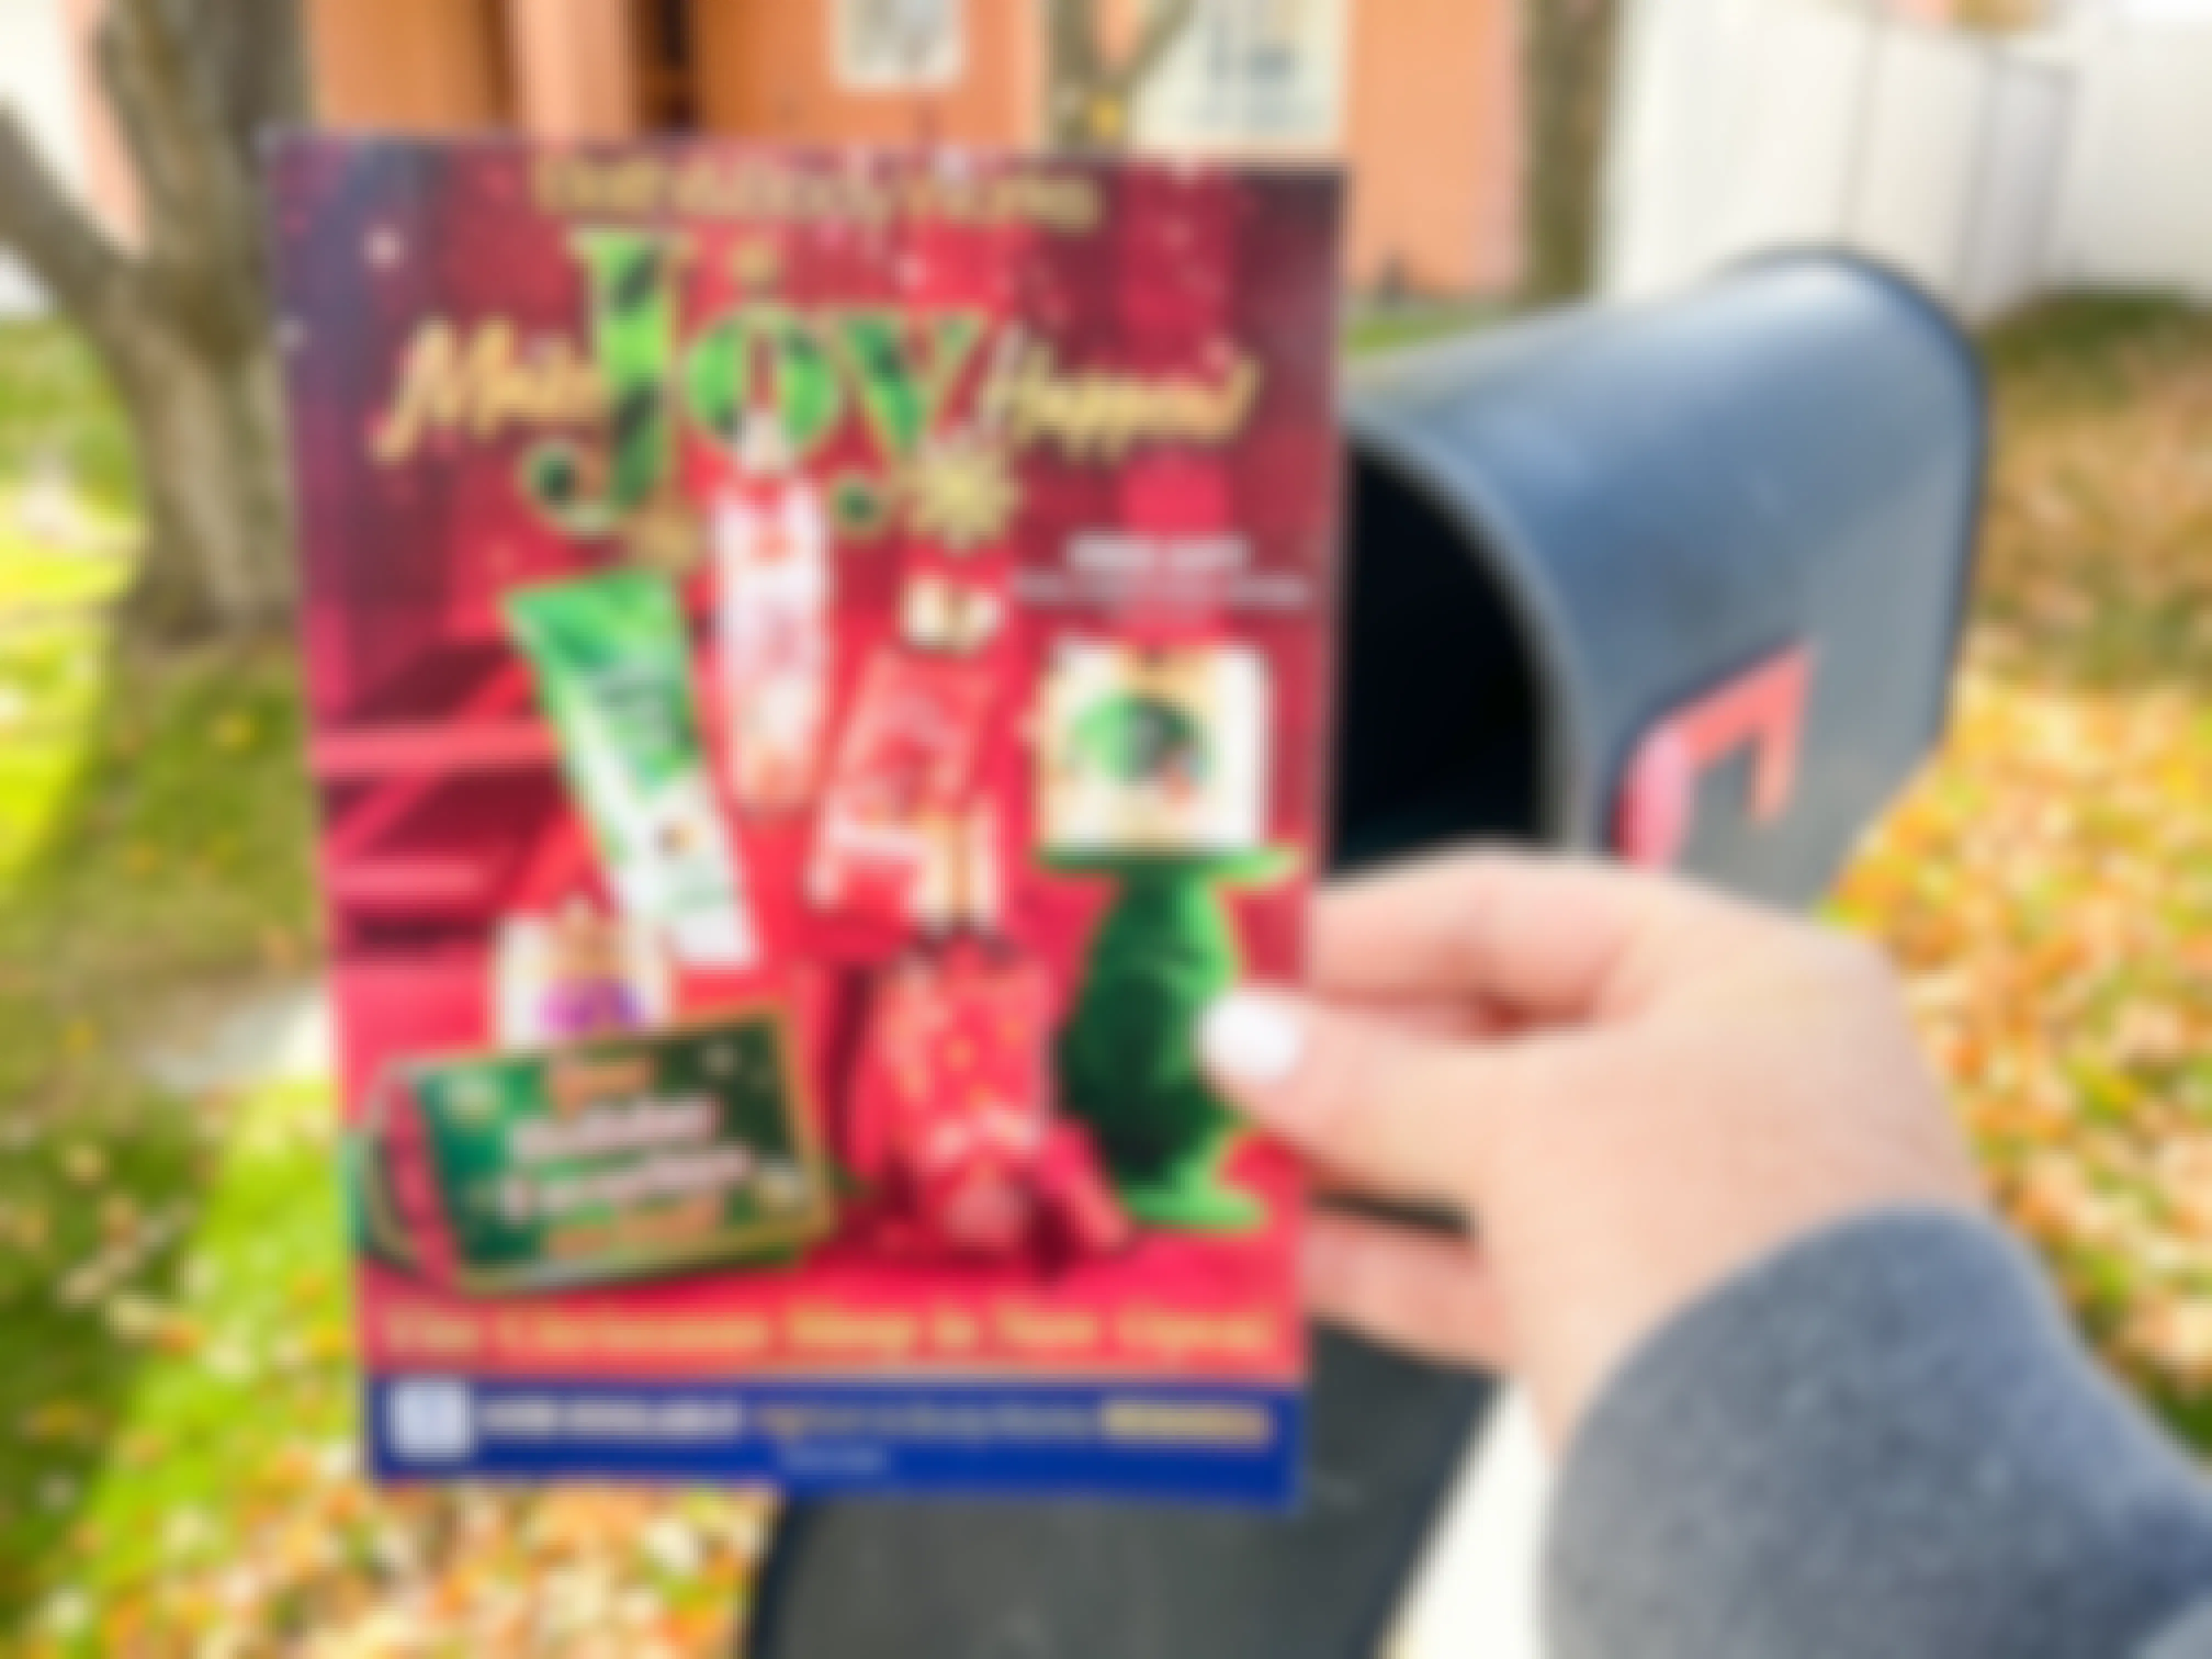 A person holding a Bath & Body Works coupon mailer next to a mail box